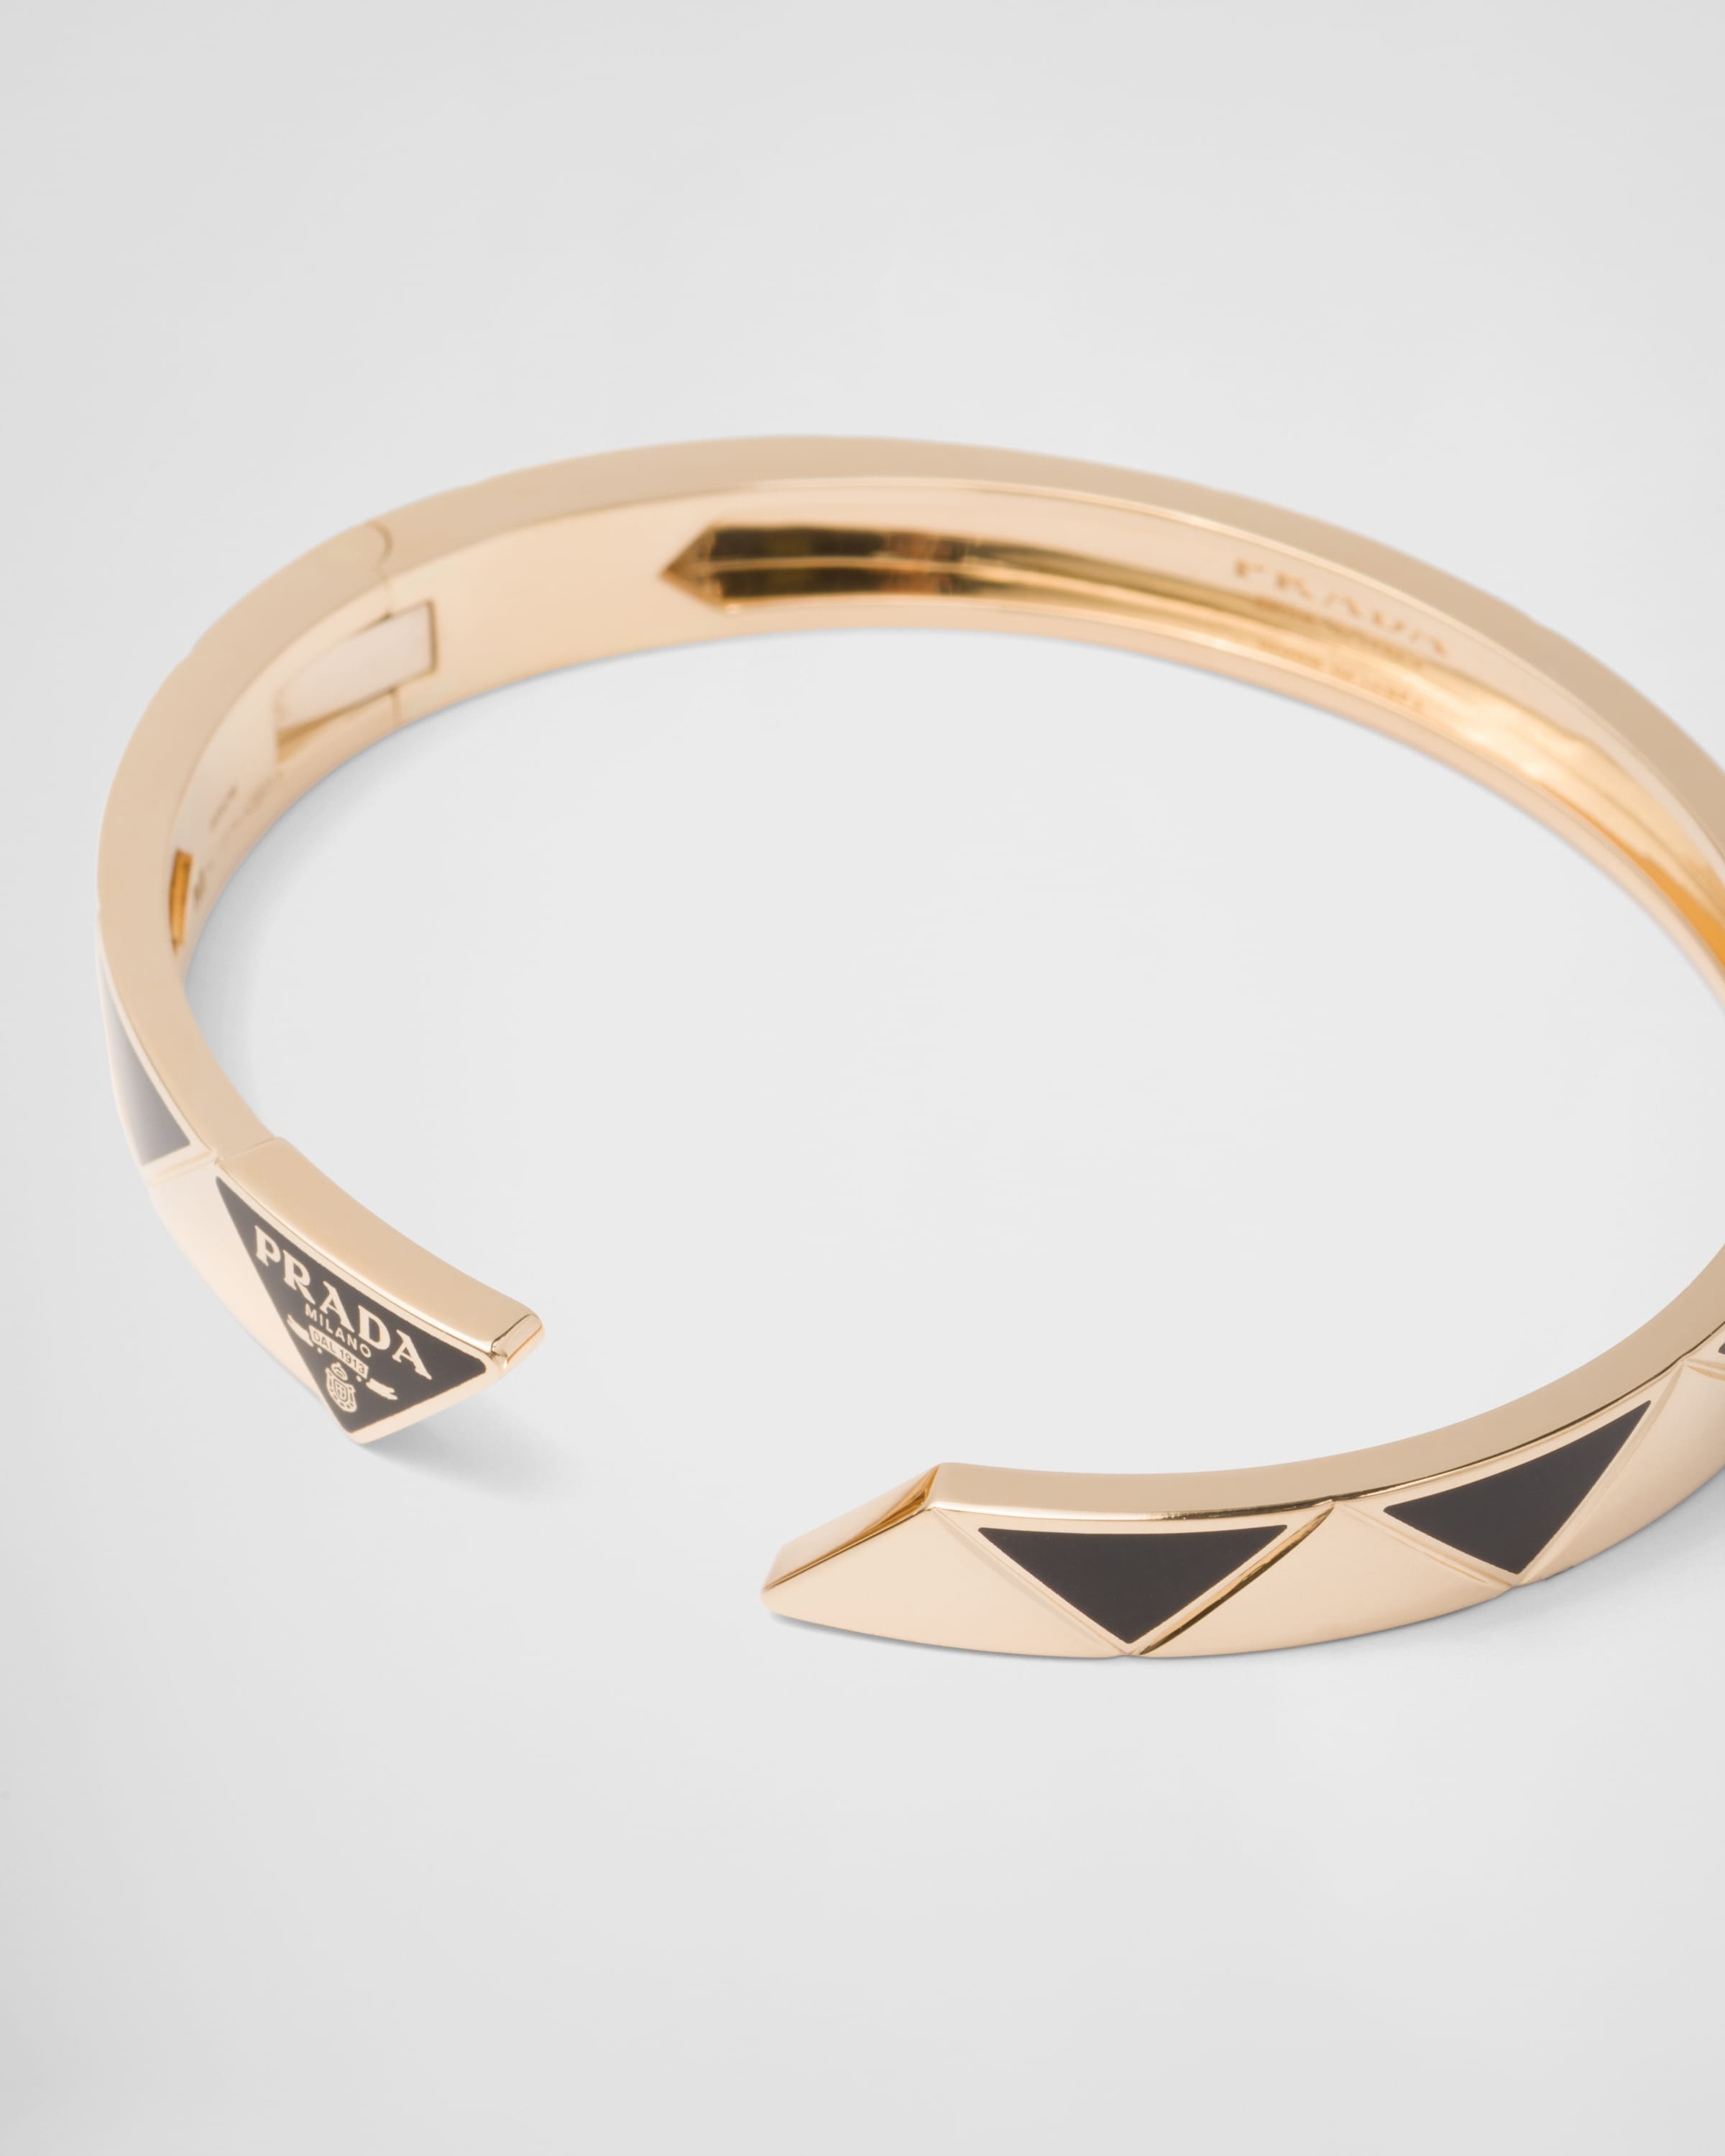 Eternal Gold bangle bracelet in yellow gold with ceramic elements - 2